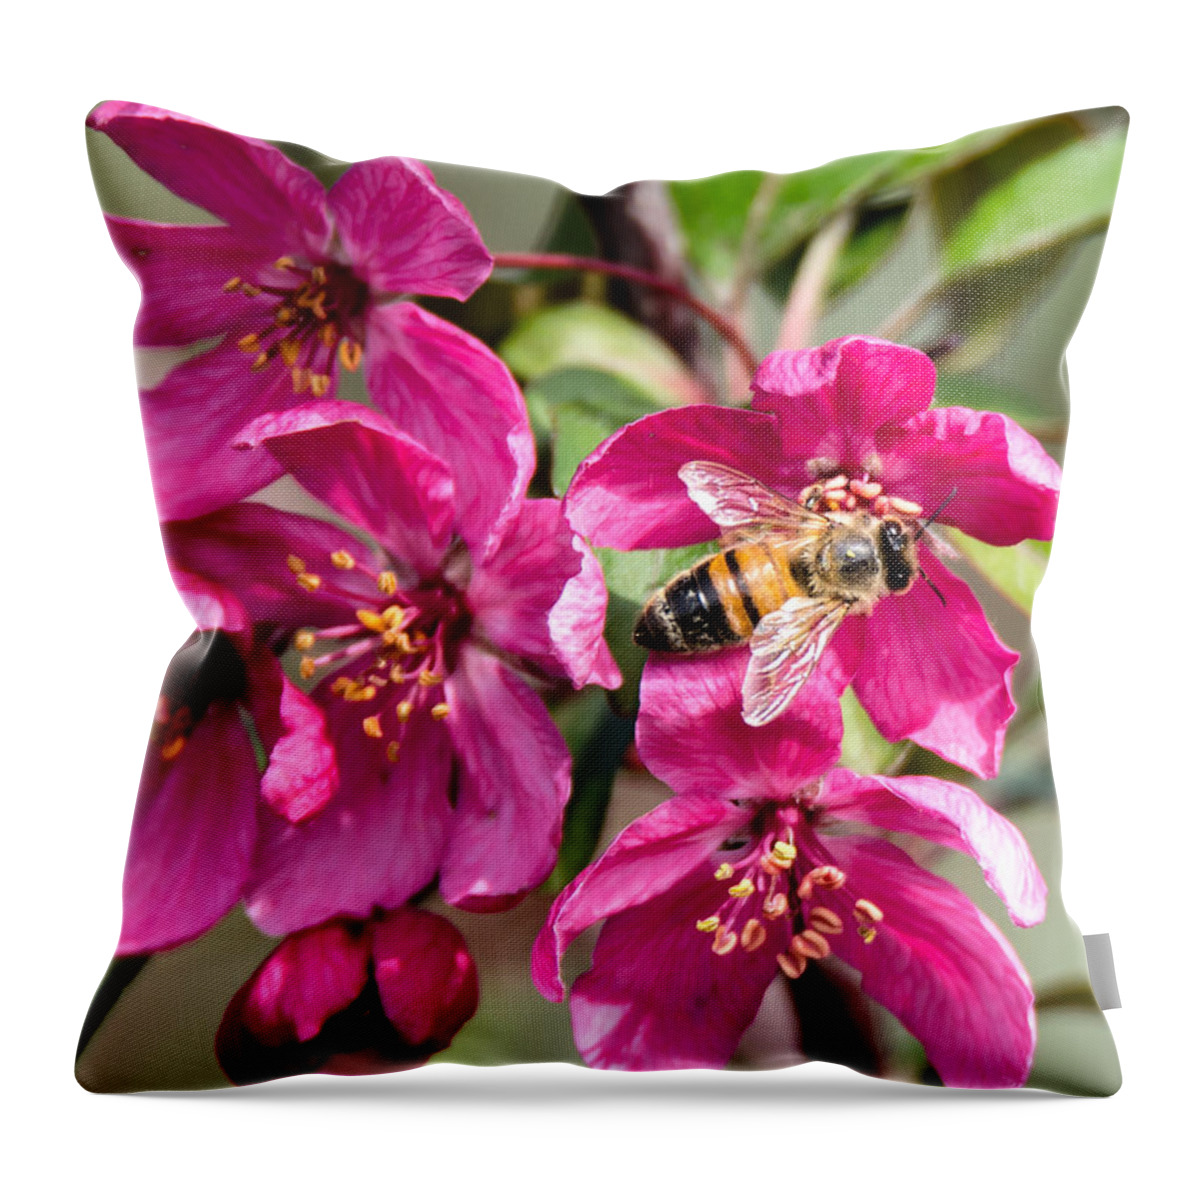 Bee Throw Pillow featuring the photograph Pollination by Steve Marler